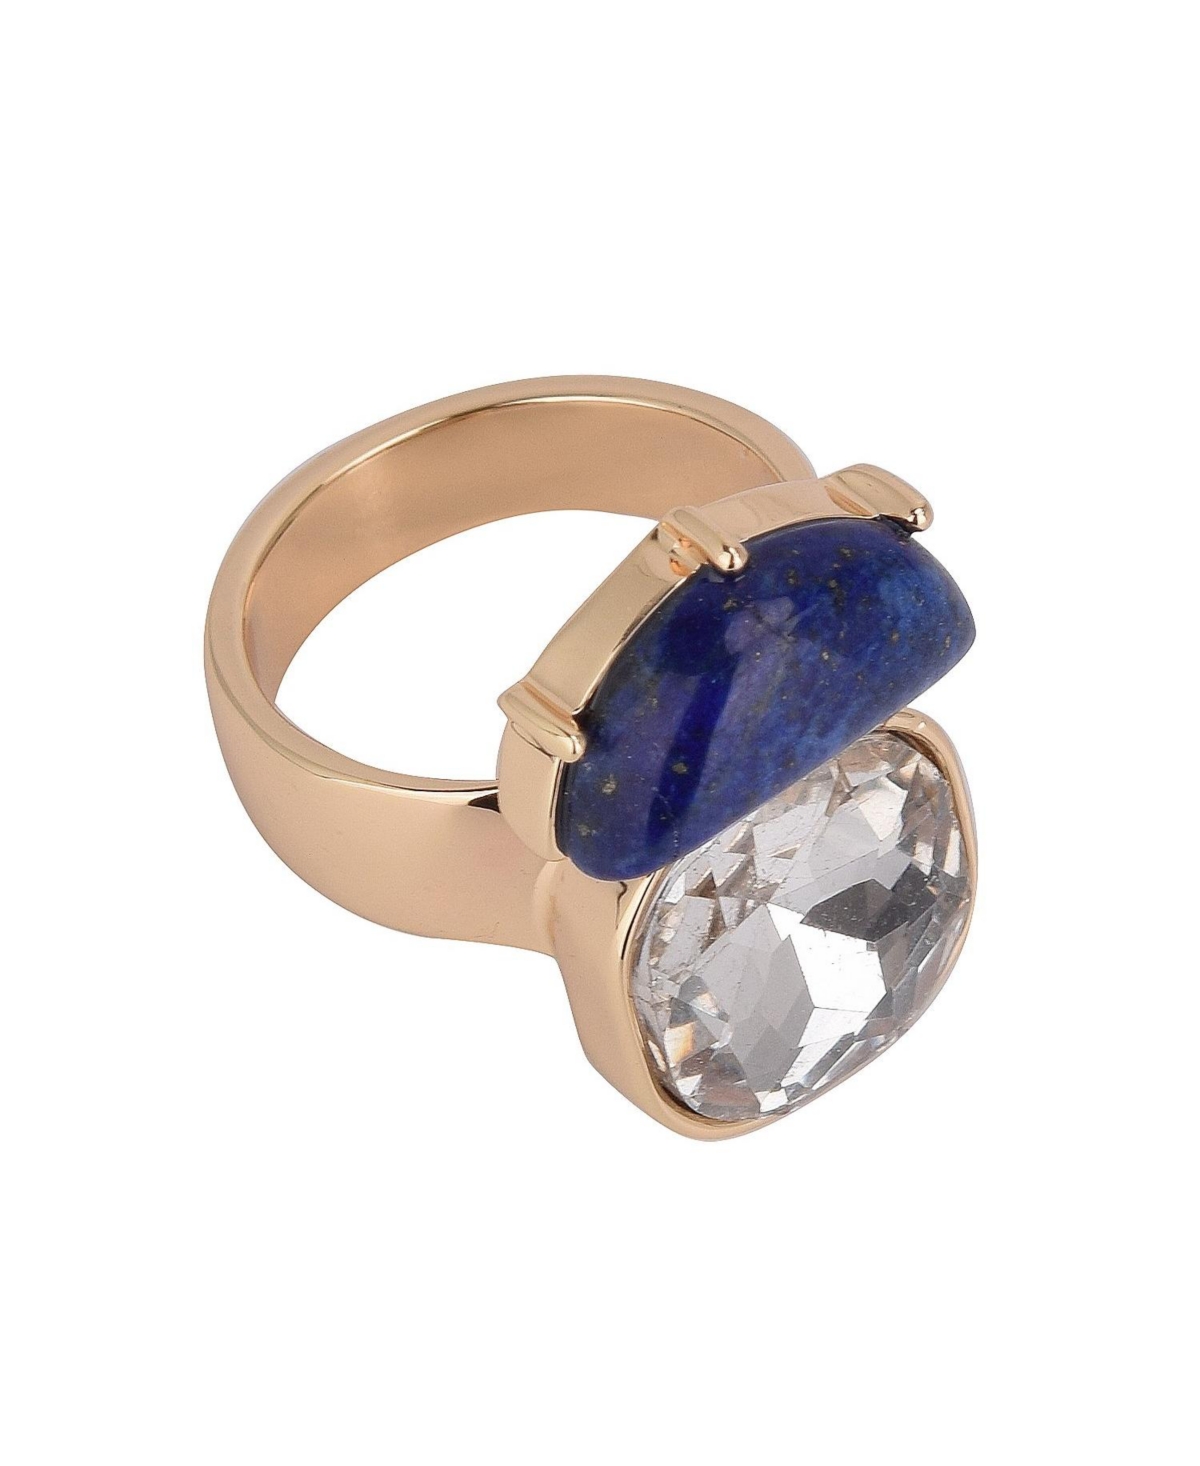 Gold Tone Crystal Stone and Semi-Precious Stone Cocktail Ring - Blue